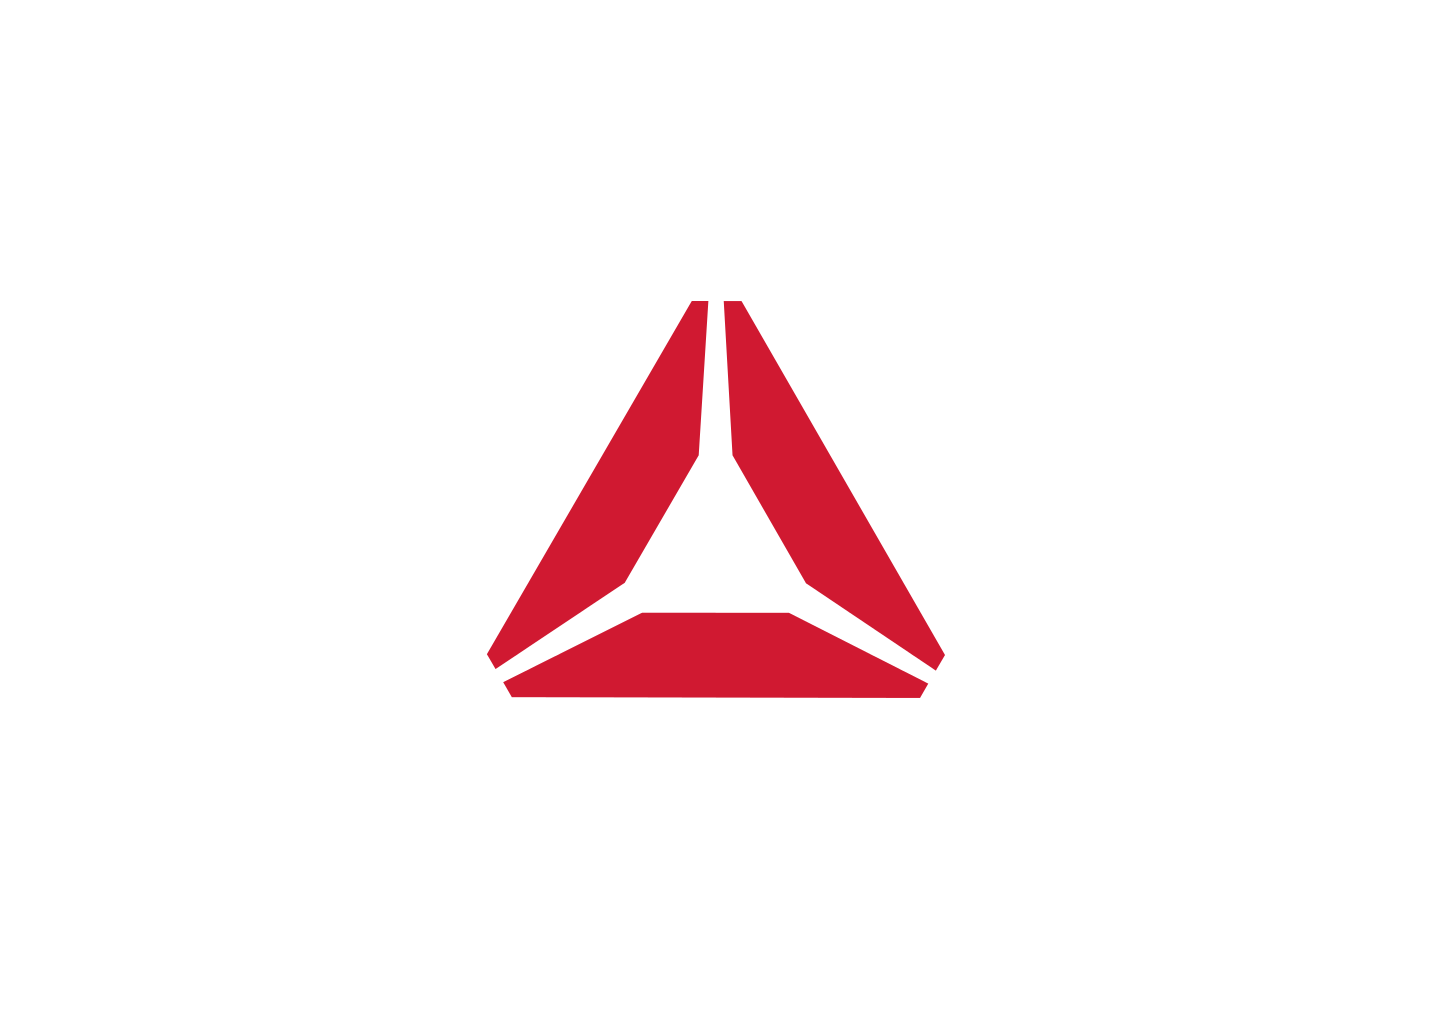 4 Red Triangles Logo - red triangle Logos